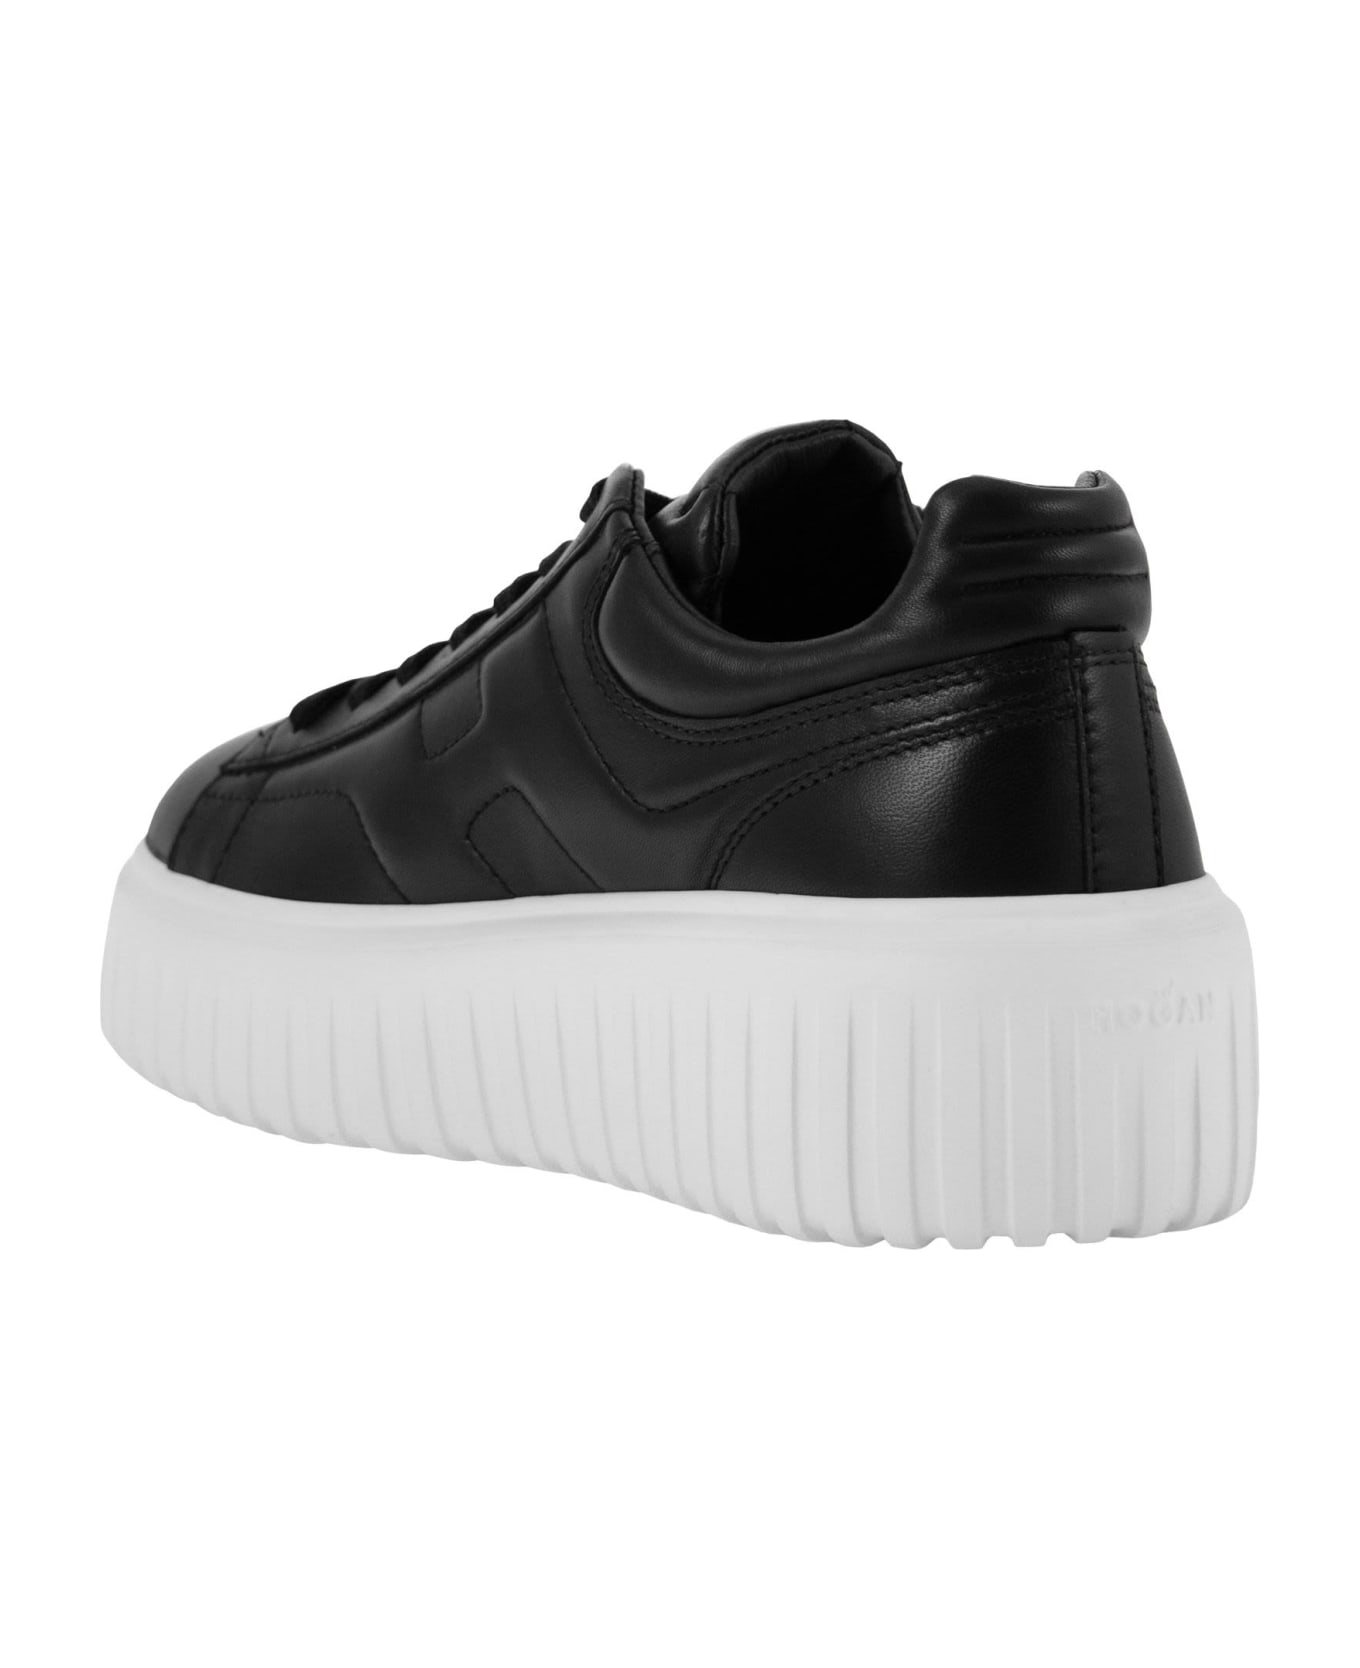 Hogan H-stripes Sneakers In Nappa Leather - Black/white